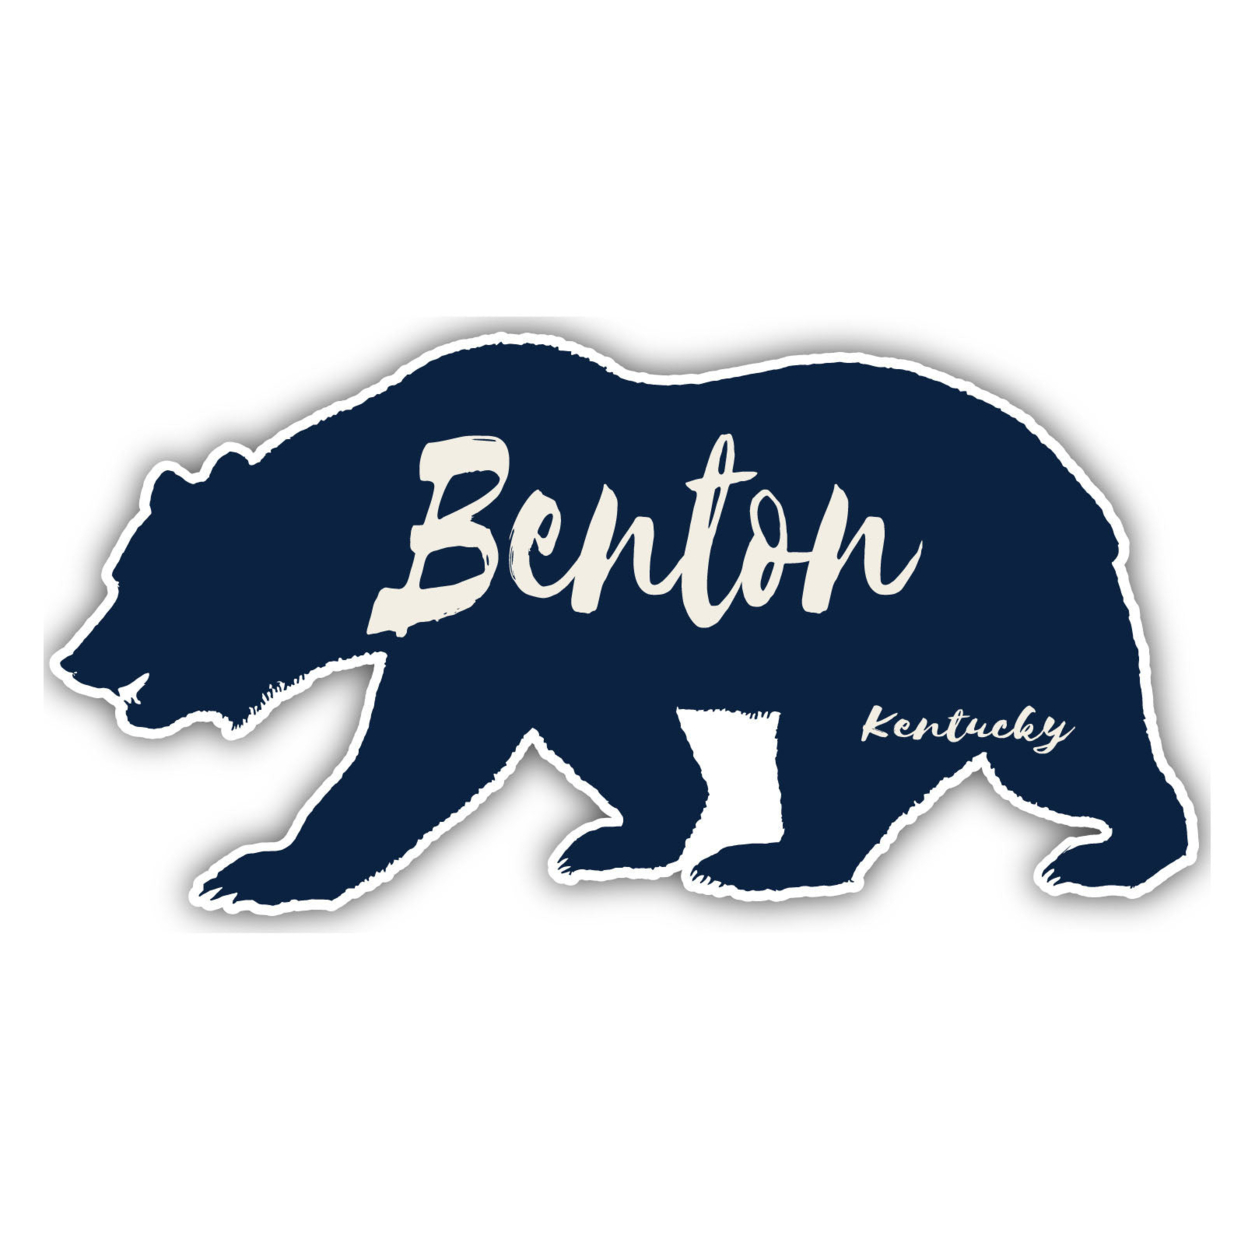 Benton Kentucky Souvenir Decorative Stickers (Choose Theme And Size) - 4-Pack, 12-Inch, Great Outdoors